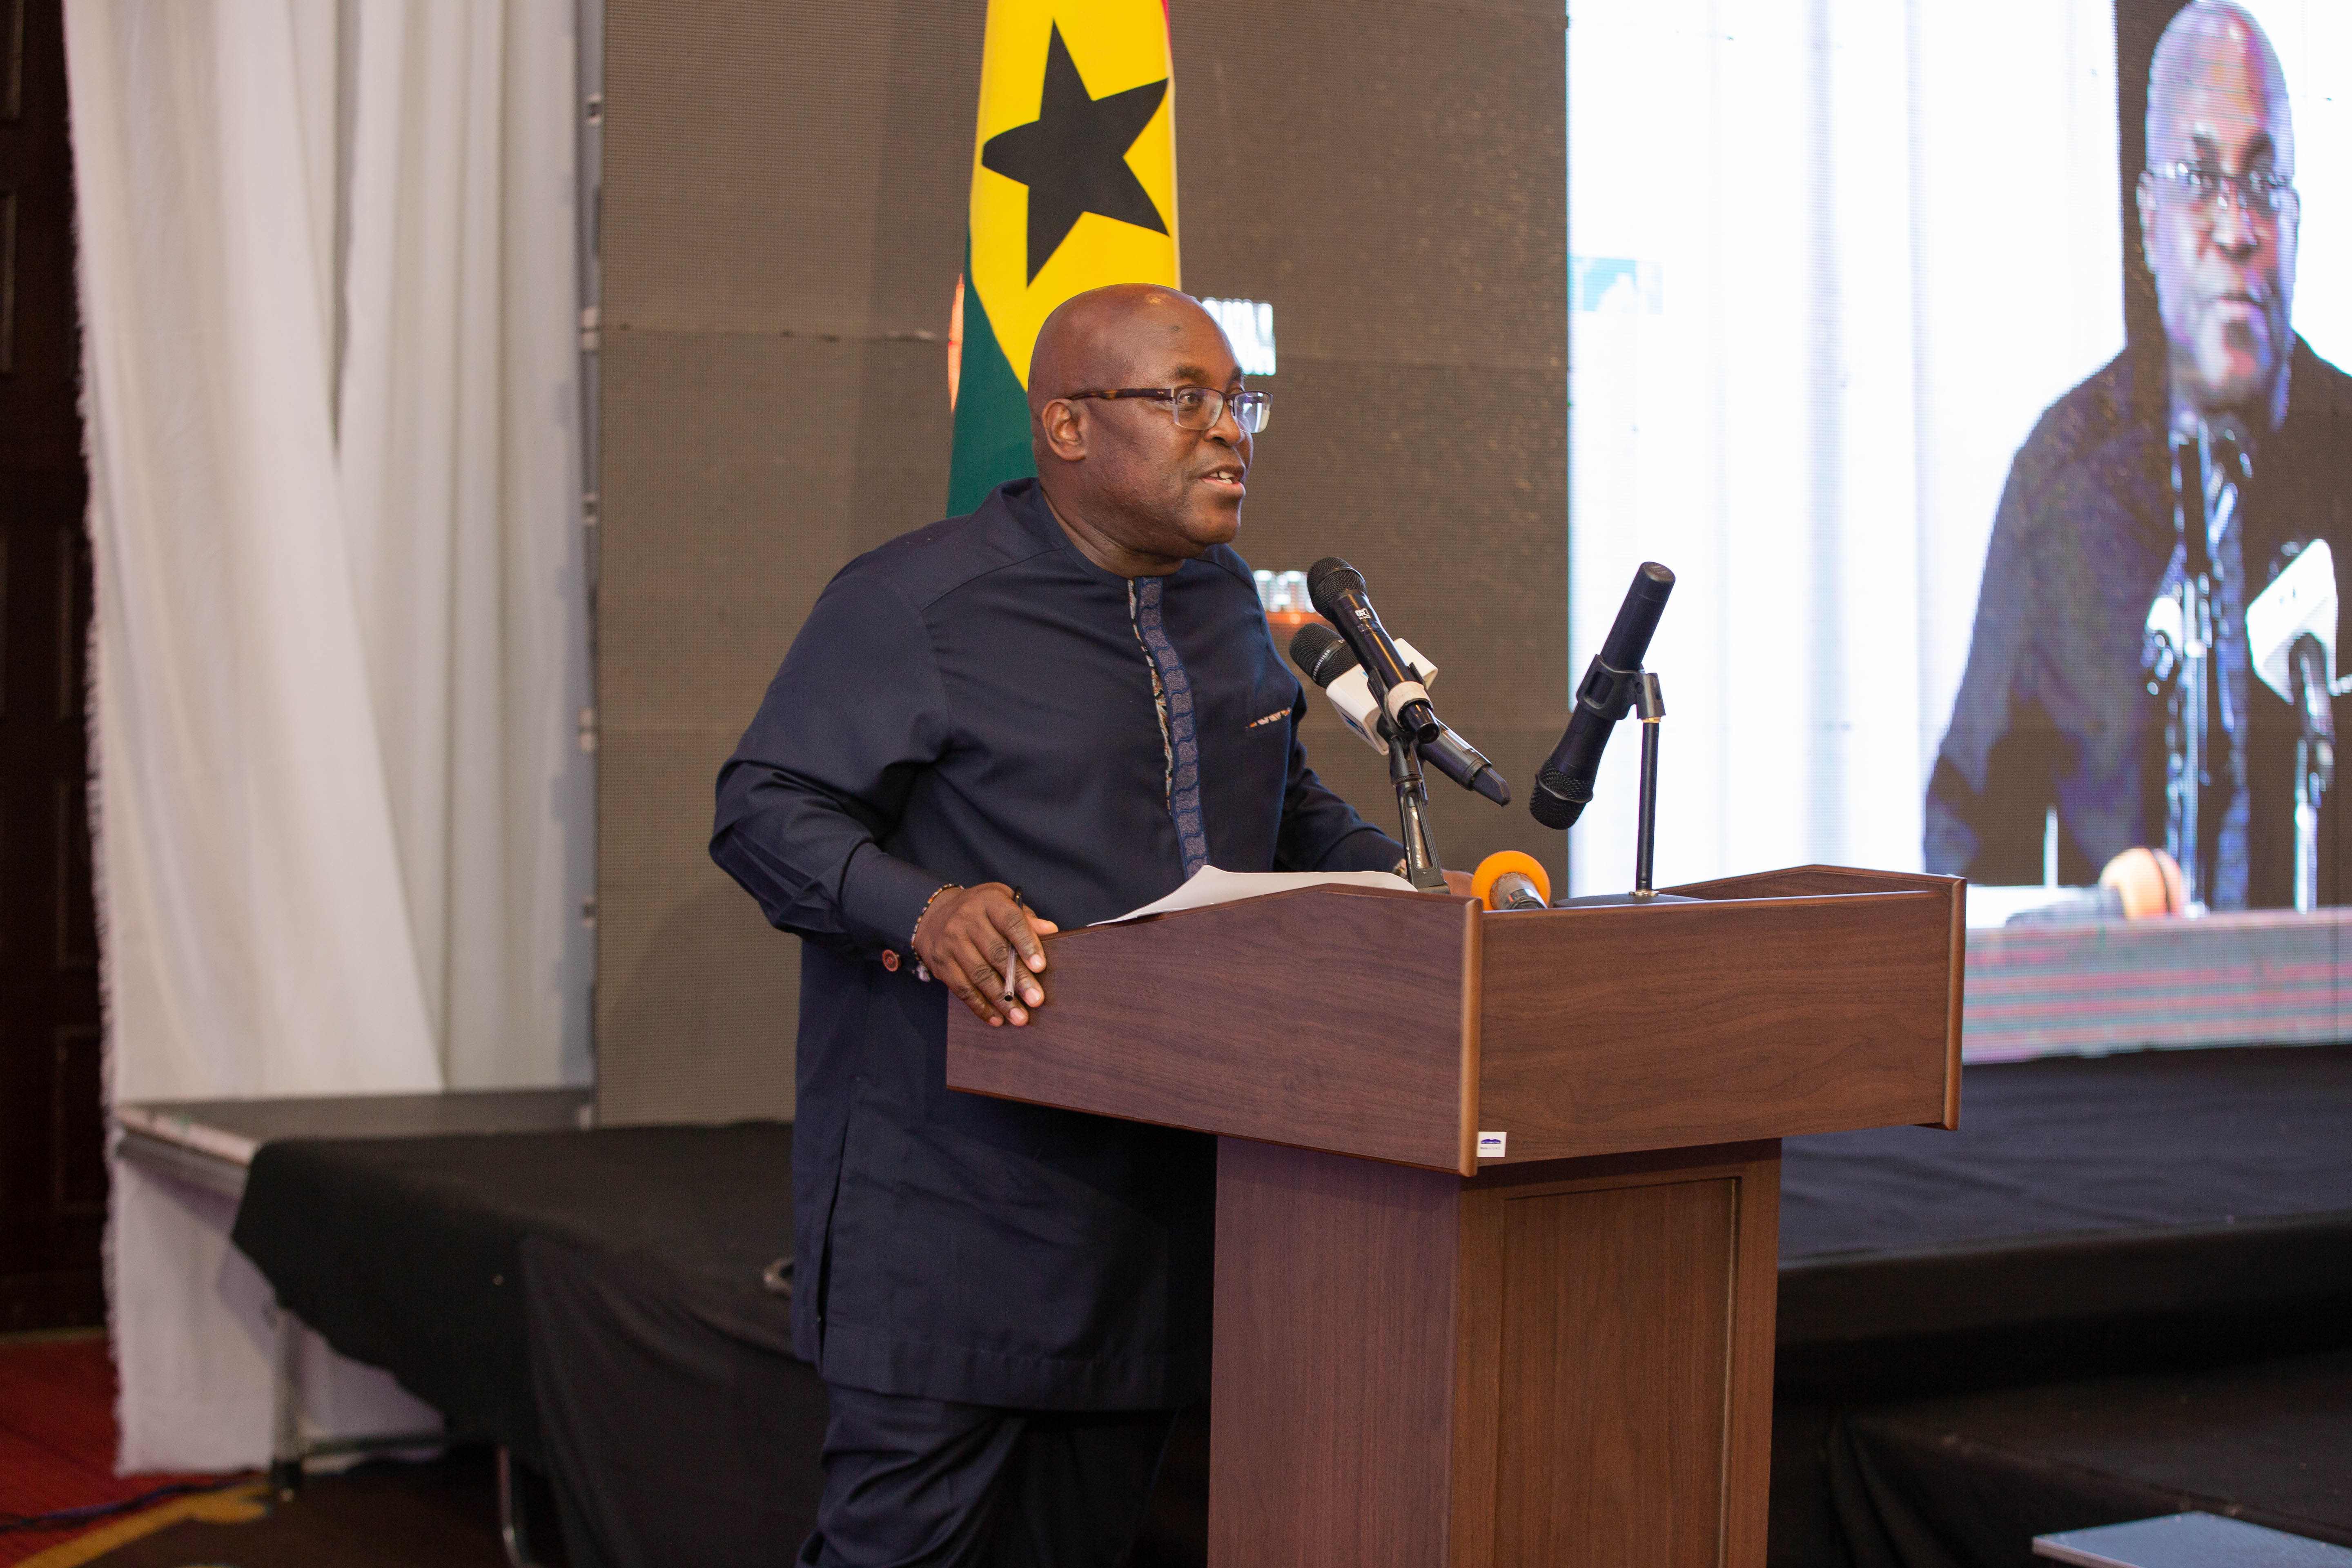 THE SIGNING CEREMONY OF THE HEADQUARTERS AGREEMENT BETWEEN THE GOVERNMENT OF GHANA AND THE COTE D'IVOIRE - GHANA COCOA INITIATIVE